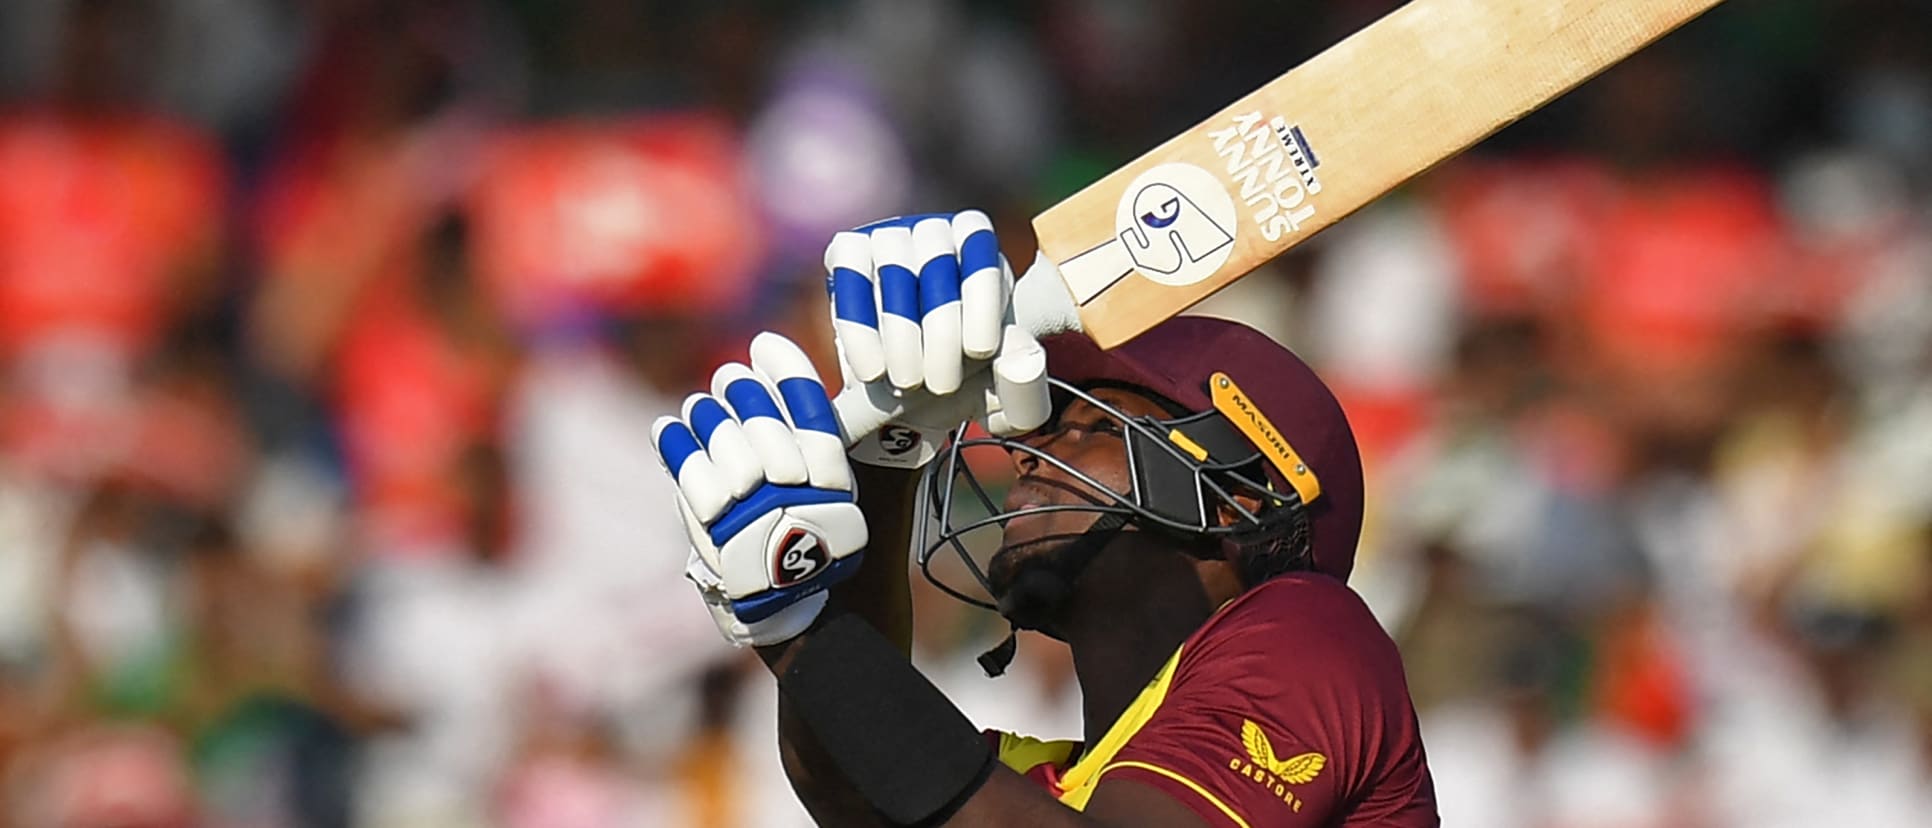 West Indies' Jason Holder hits a six during the ICC mens Twenty20 World Cup cricket match between Bangladesh and West Indies at the Sharjah Cricket Stadium in Sharjah on October 29, 2021.